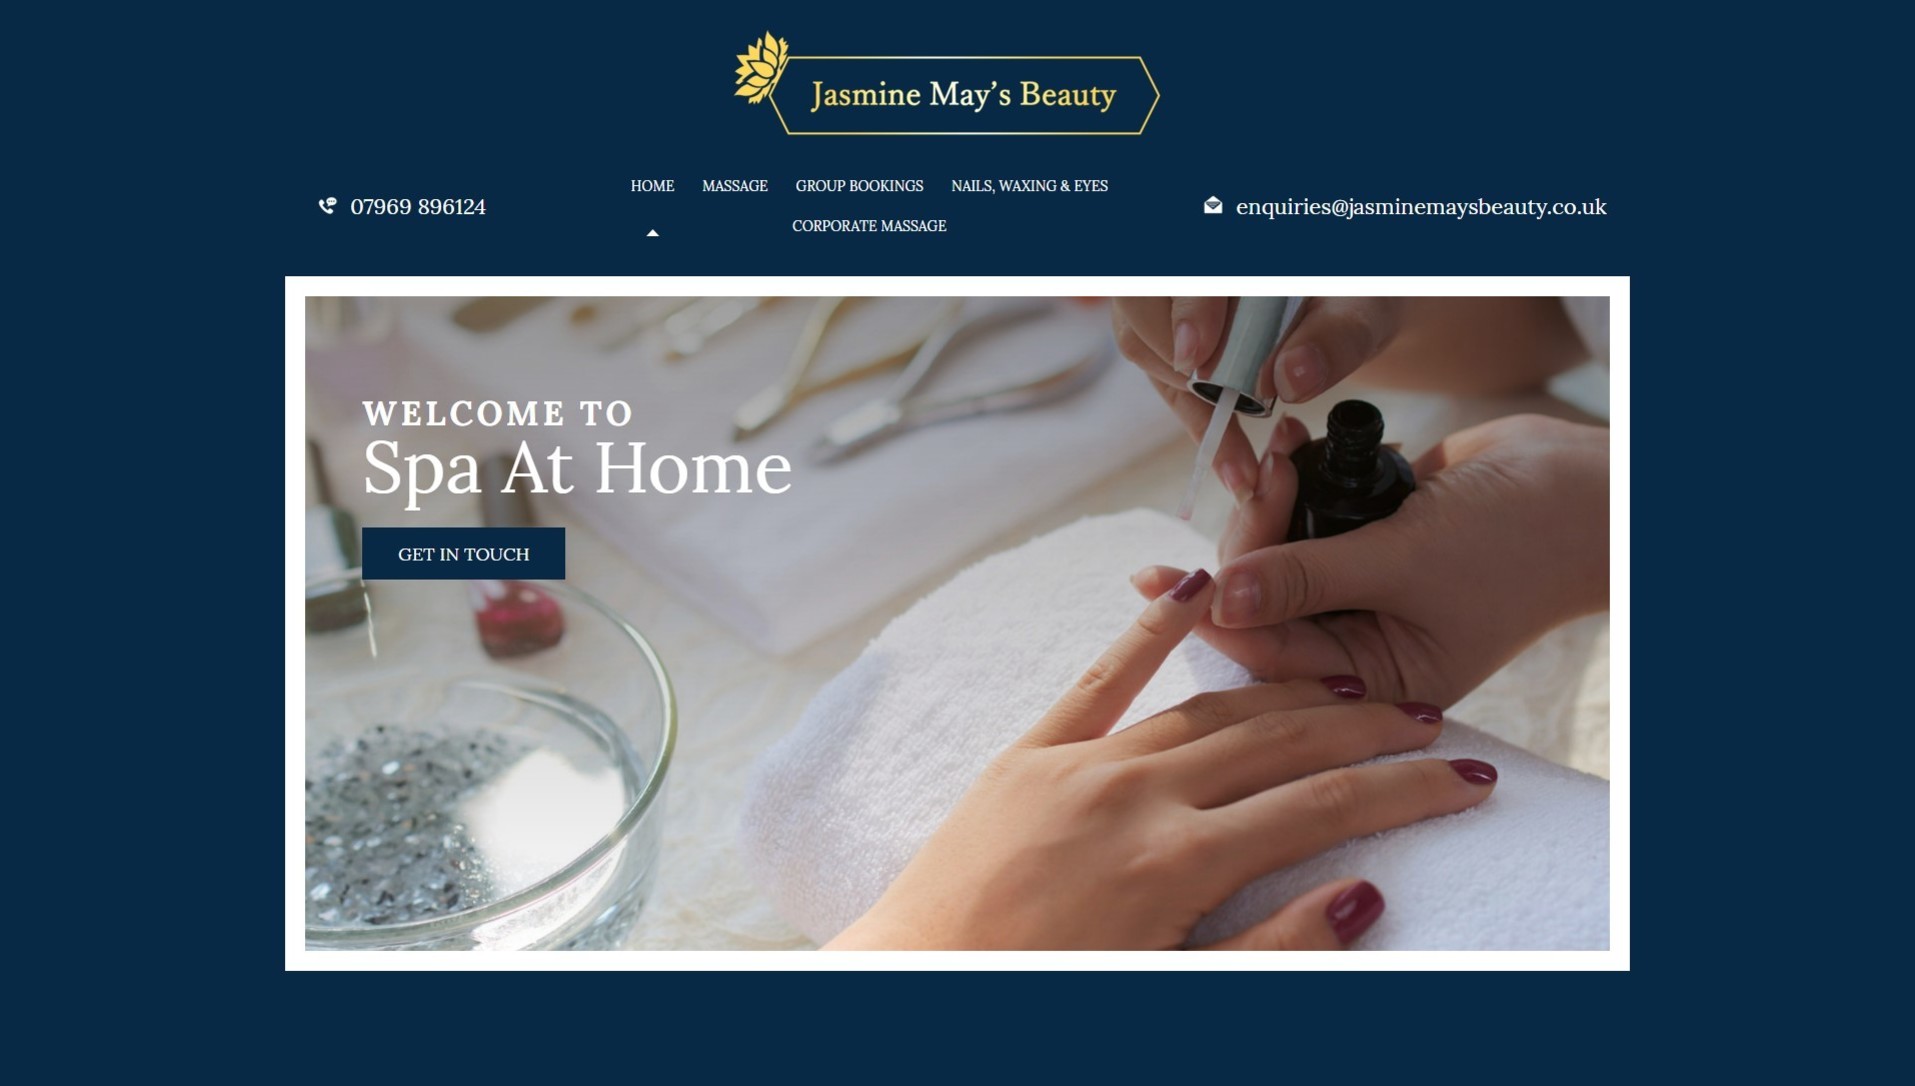 A website showing a spa at home company